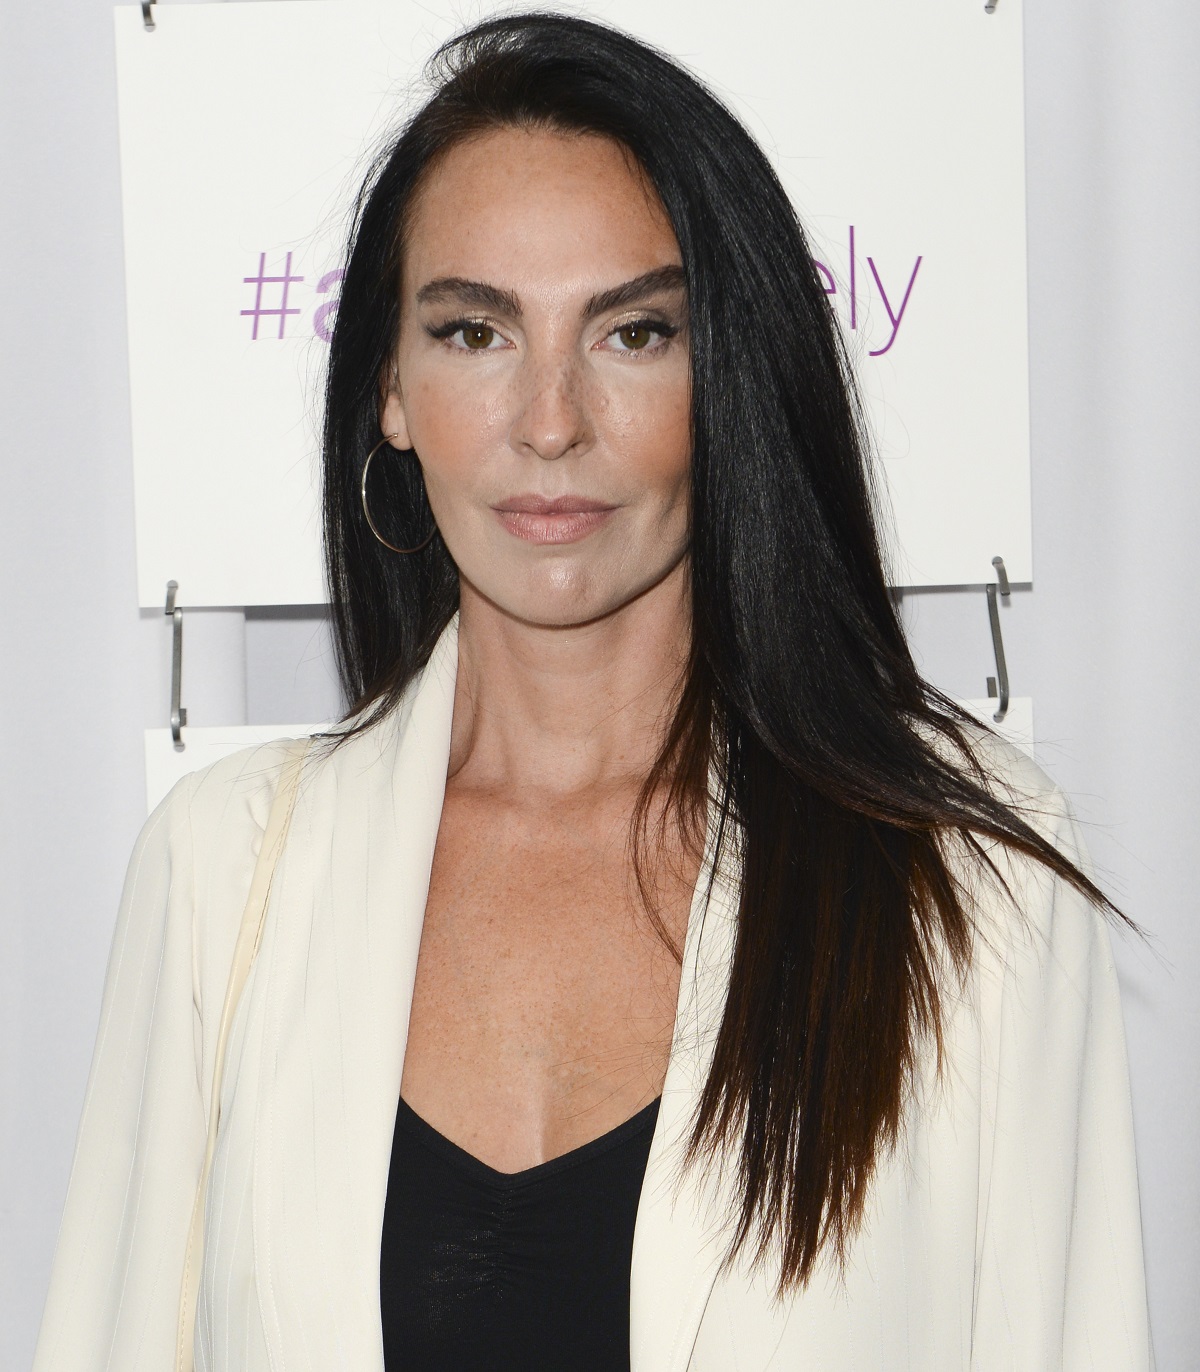 'General Hospital' star Inga Cadranel wearing a black shirt and white blazer during a red carpet appearance.